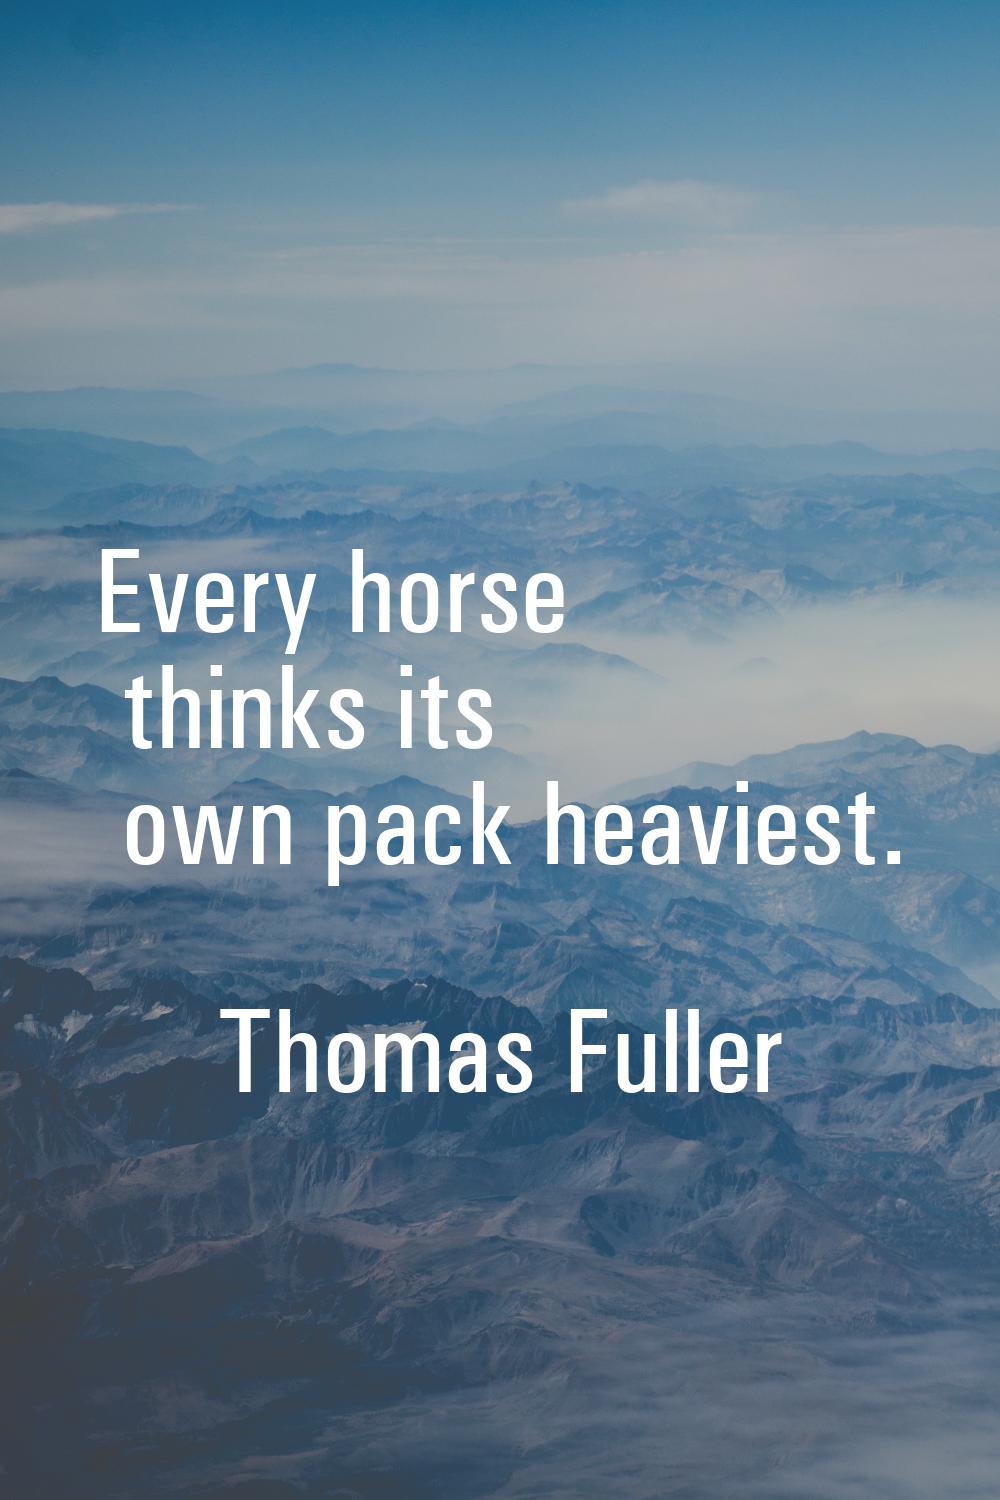 Every horse thinks its own pack heaviest.